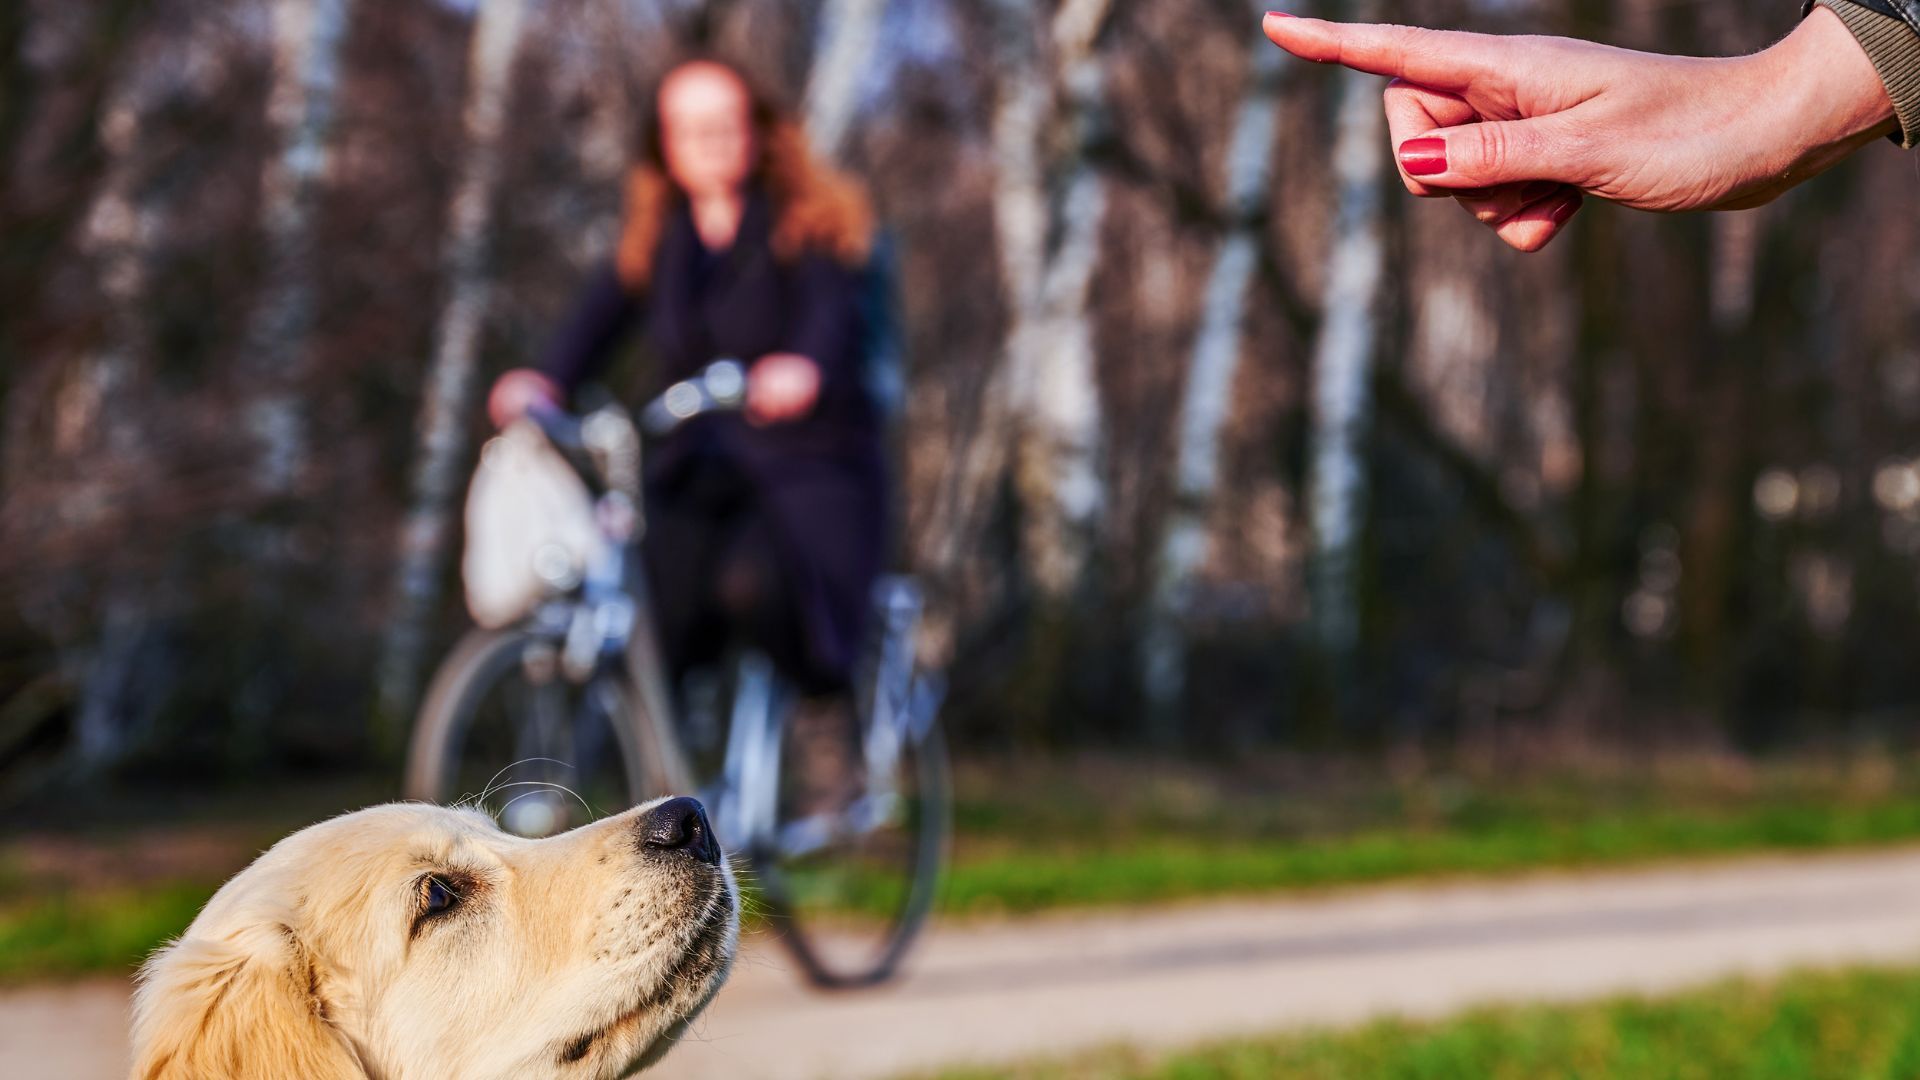 <p>                     While we’d love to think otherwise, dogs don’t understand language as humans do. But they do seem to respond better to hand signals. So instead of just speaking, signal too.                    </p>